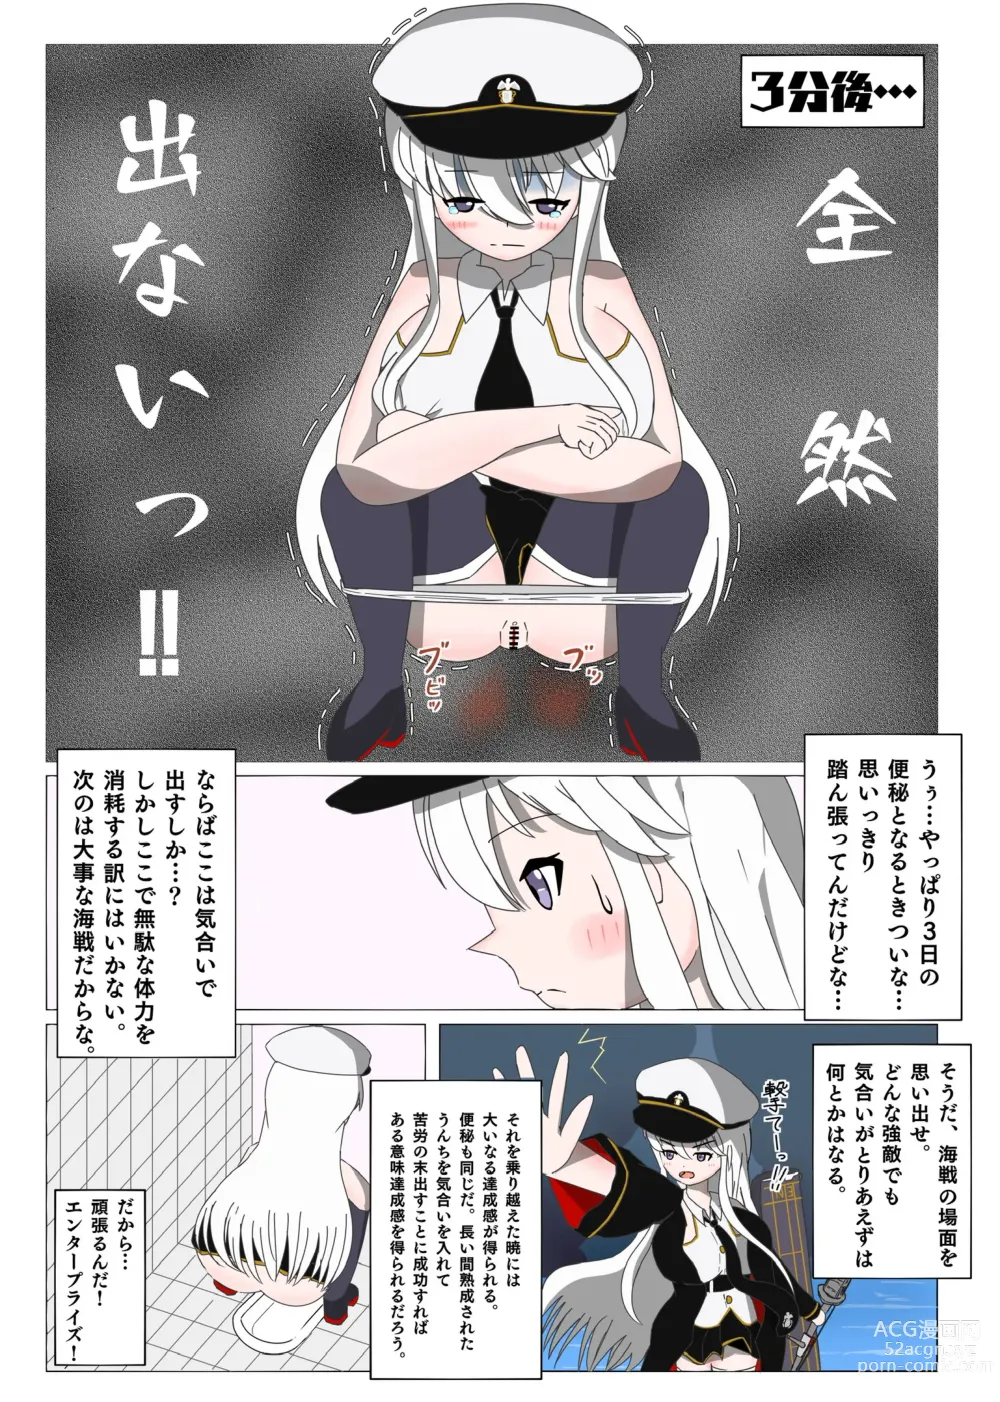 Page 2 of doujinshi A manga in which Enterprise relieves 3 days worth of poop in a Japanese-style toilet